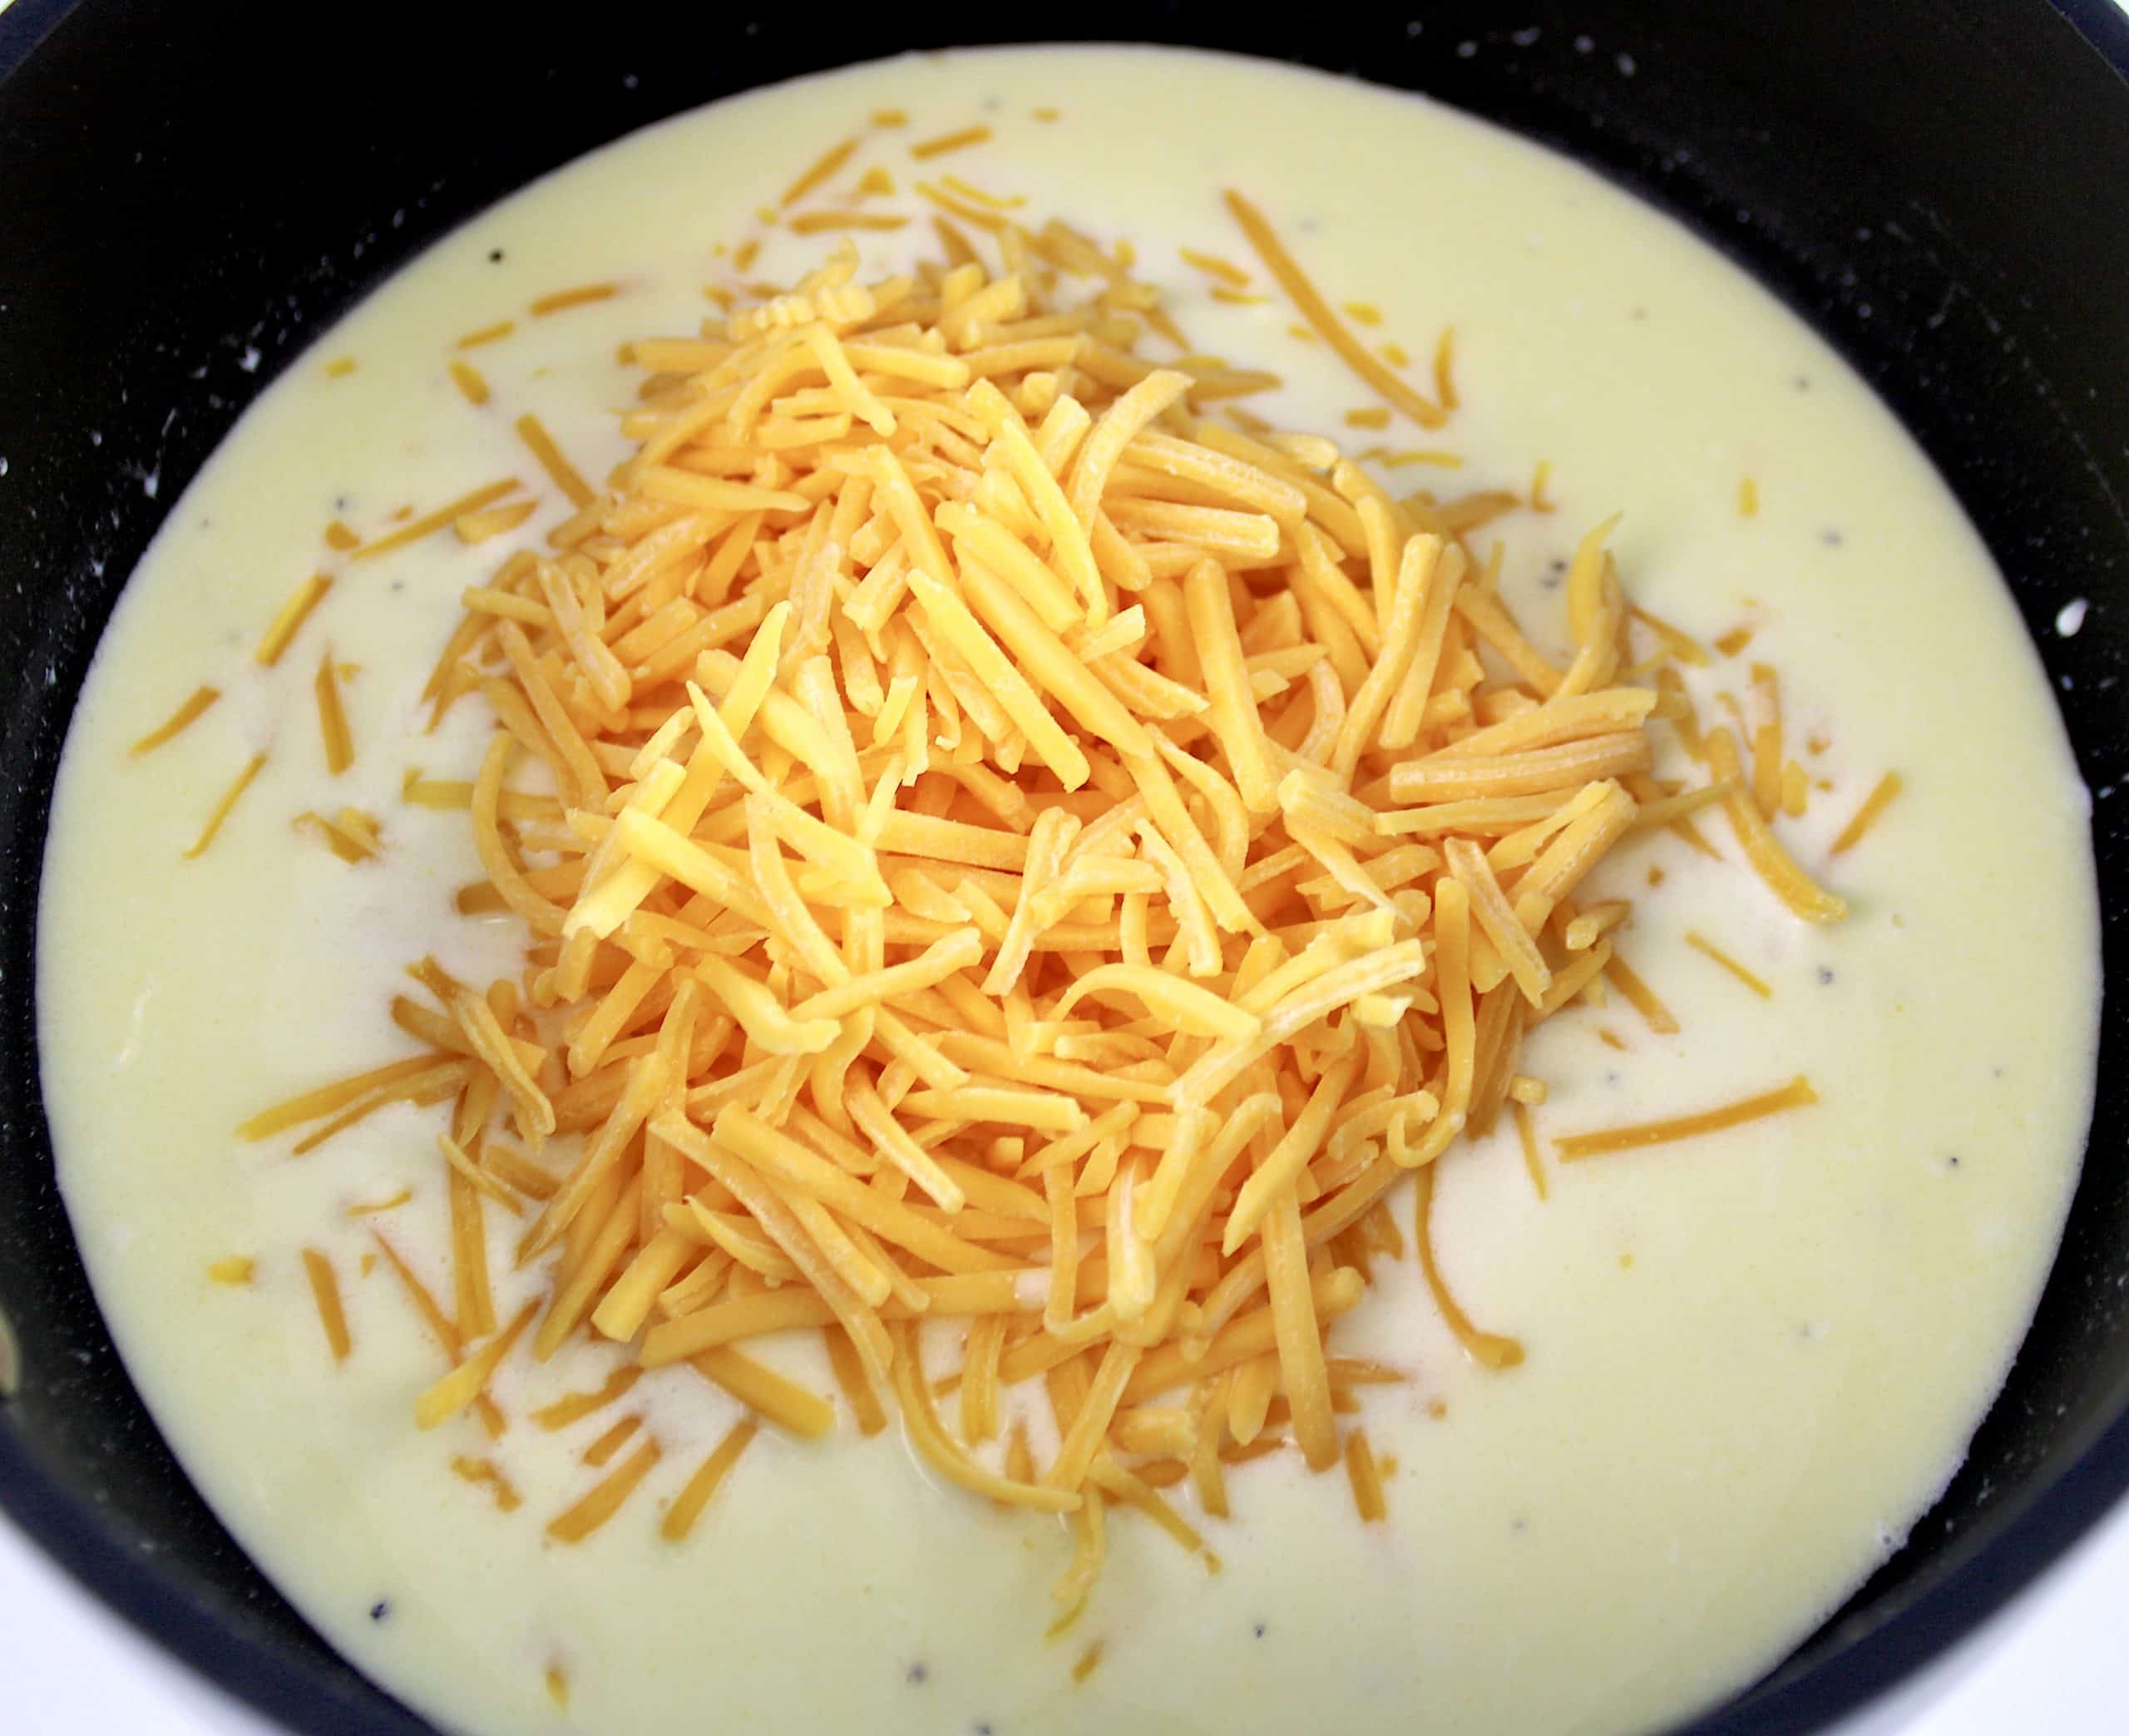 cream sauce with shredded cheddar cheese on top in saucepan